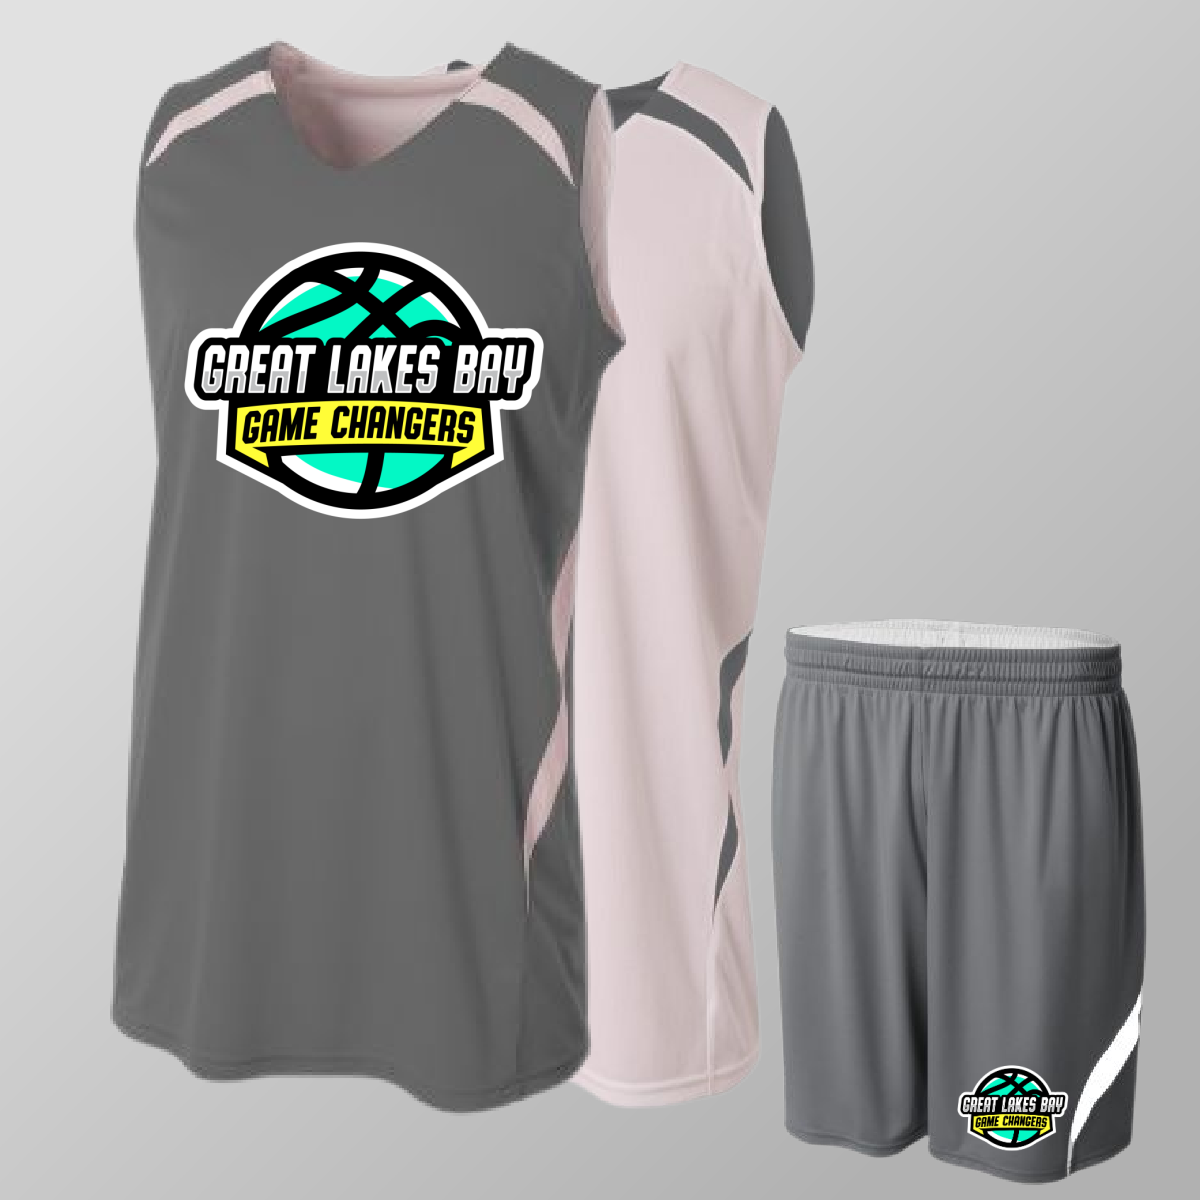 Great Lakes Bay Game Changers - Double Sided Basketball Jersey & Shorts